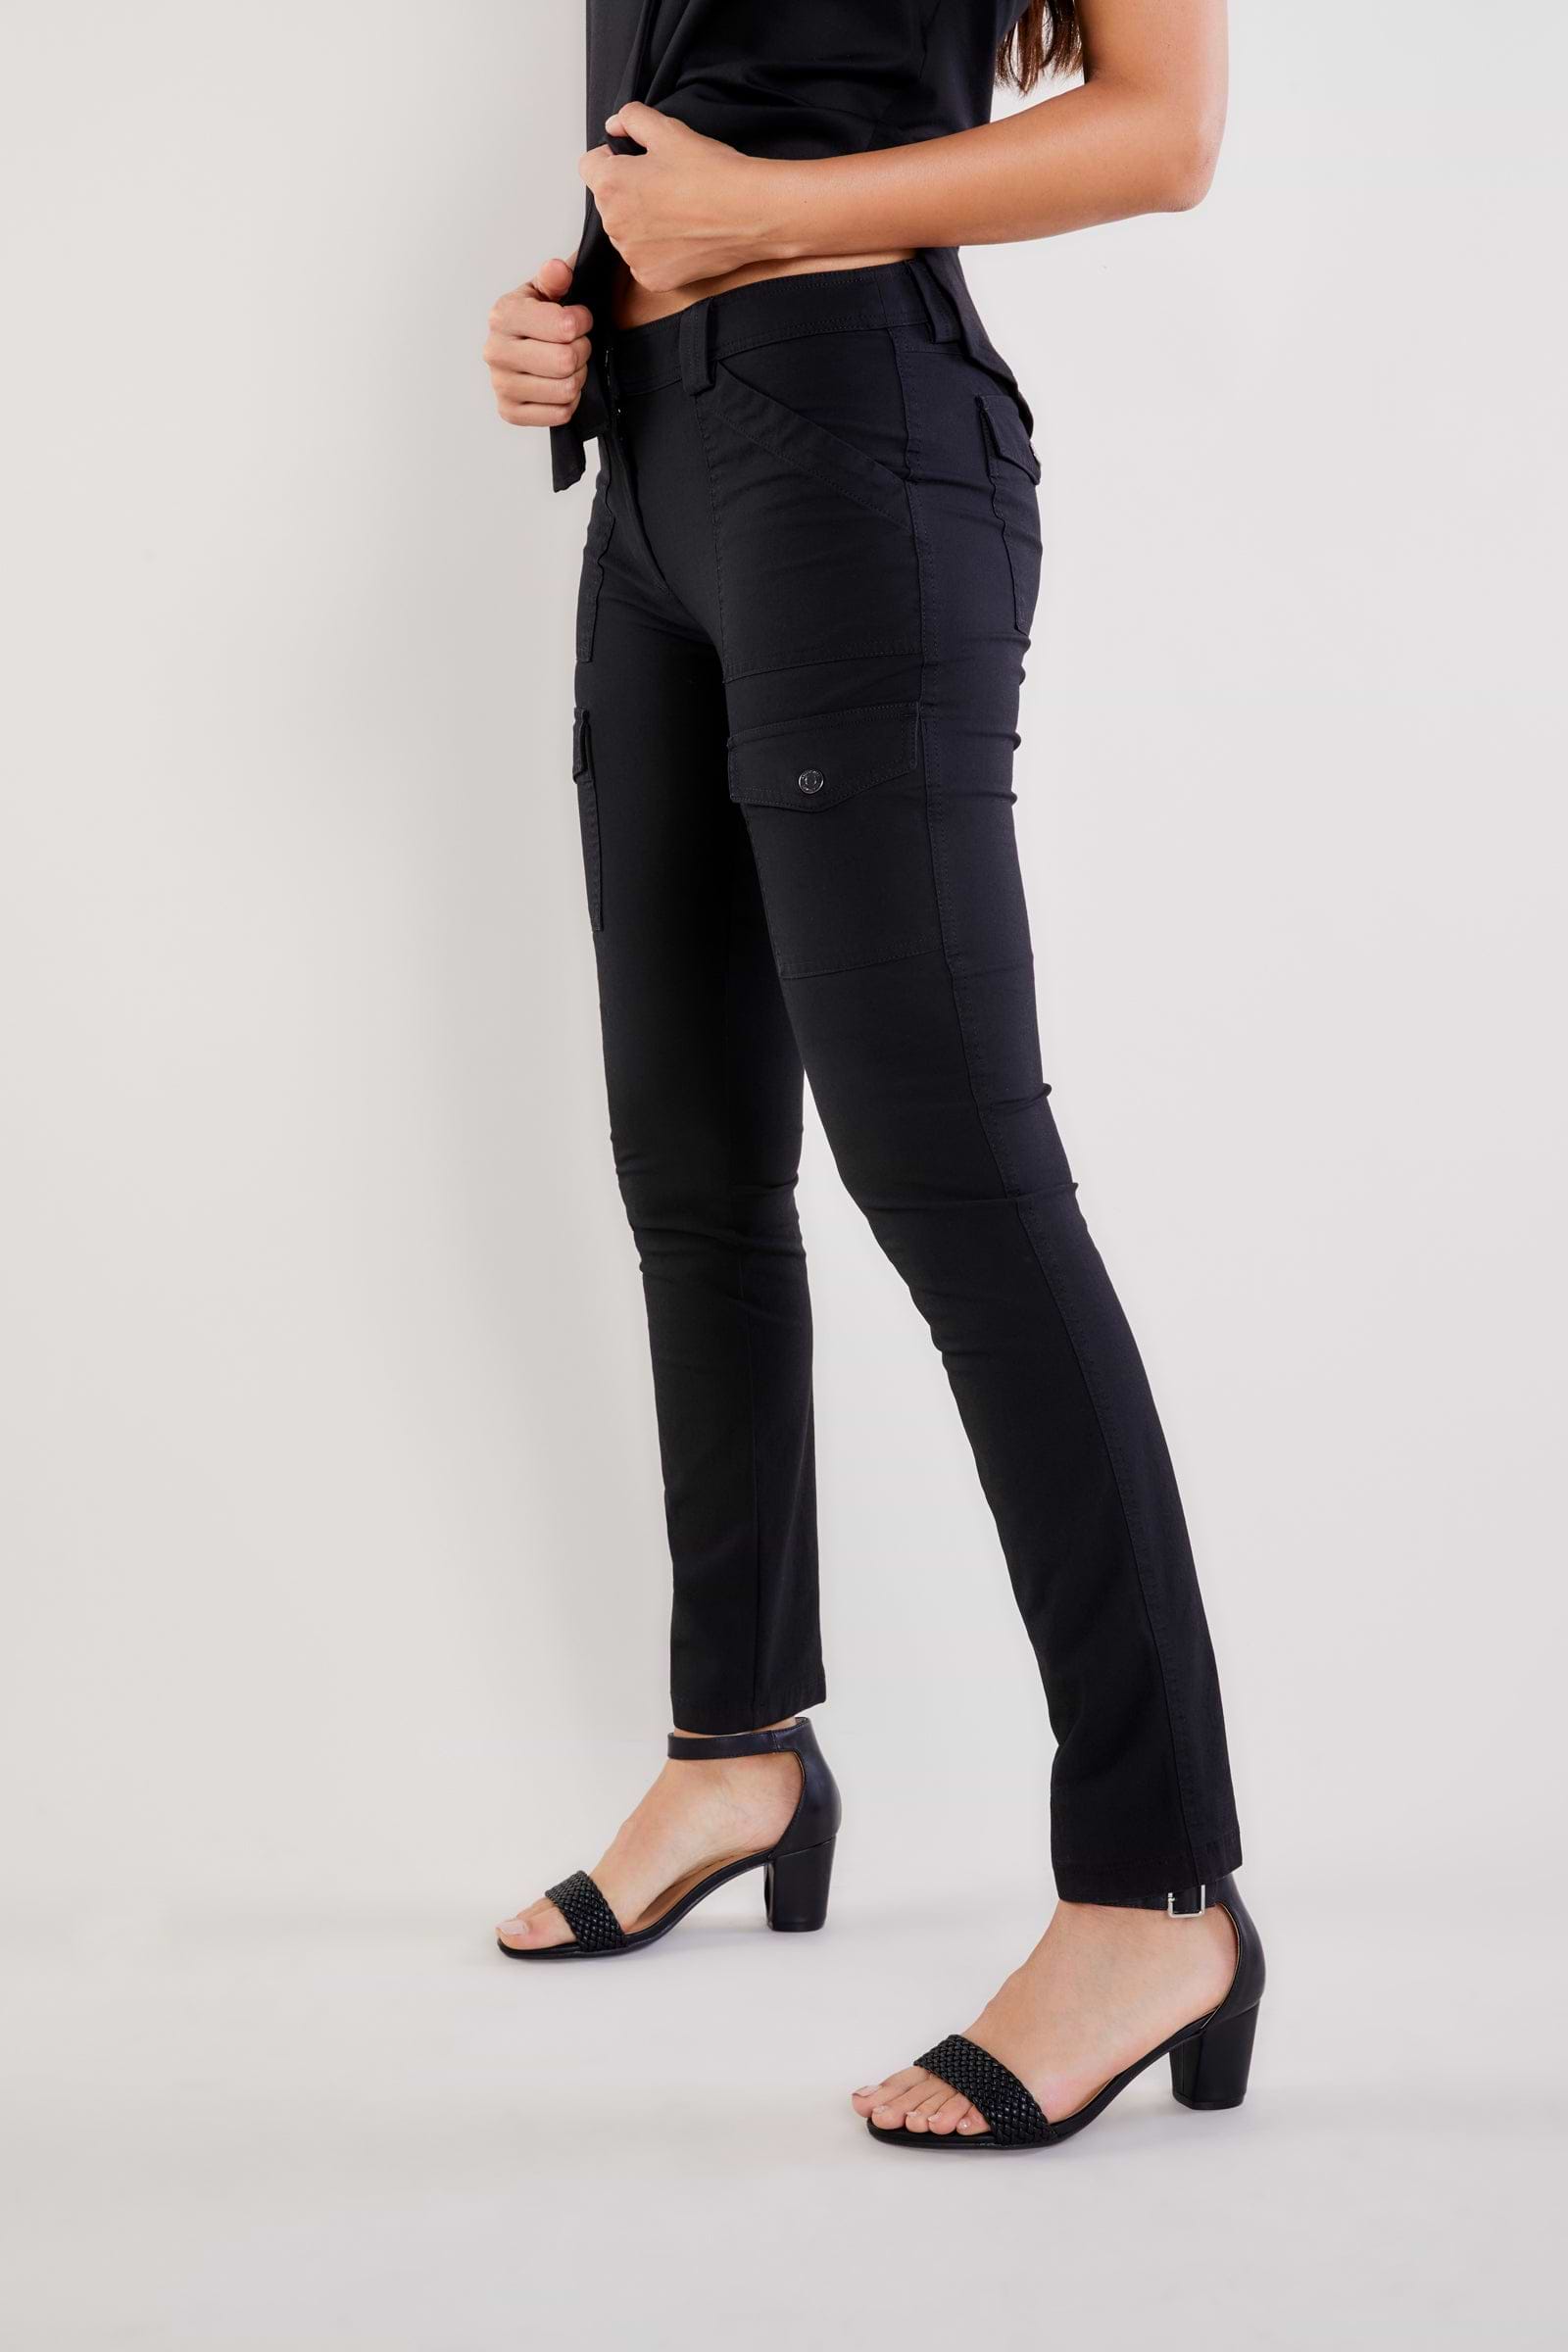 The Best Travel Cargo Pants. Side Profile of the Kate Skinny Cargo Pant in Black